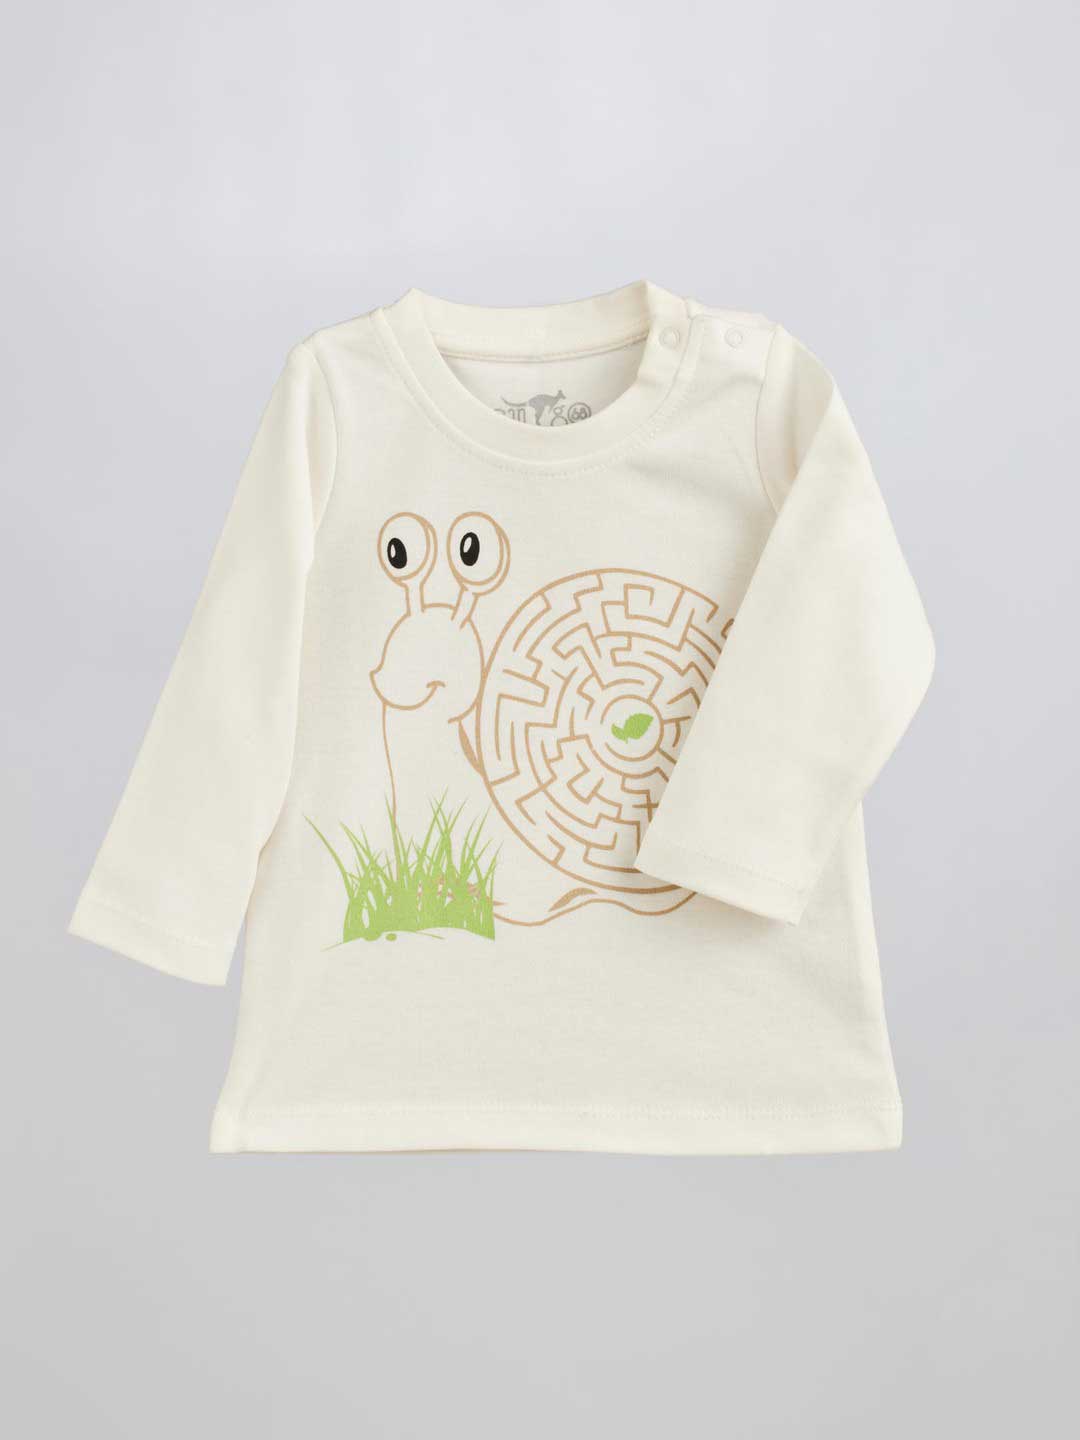 The pajama blouse from the newborn pajama set Snails 300 features a cute snail on the front